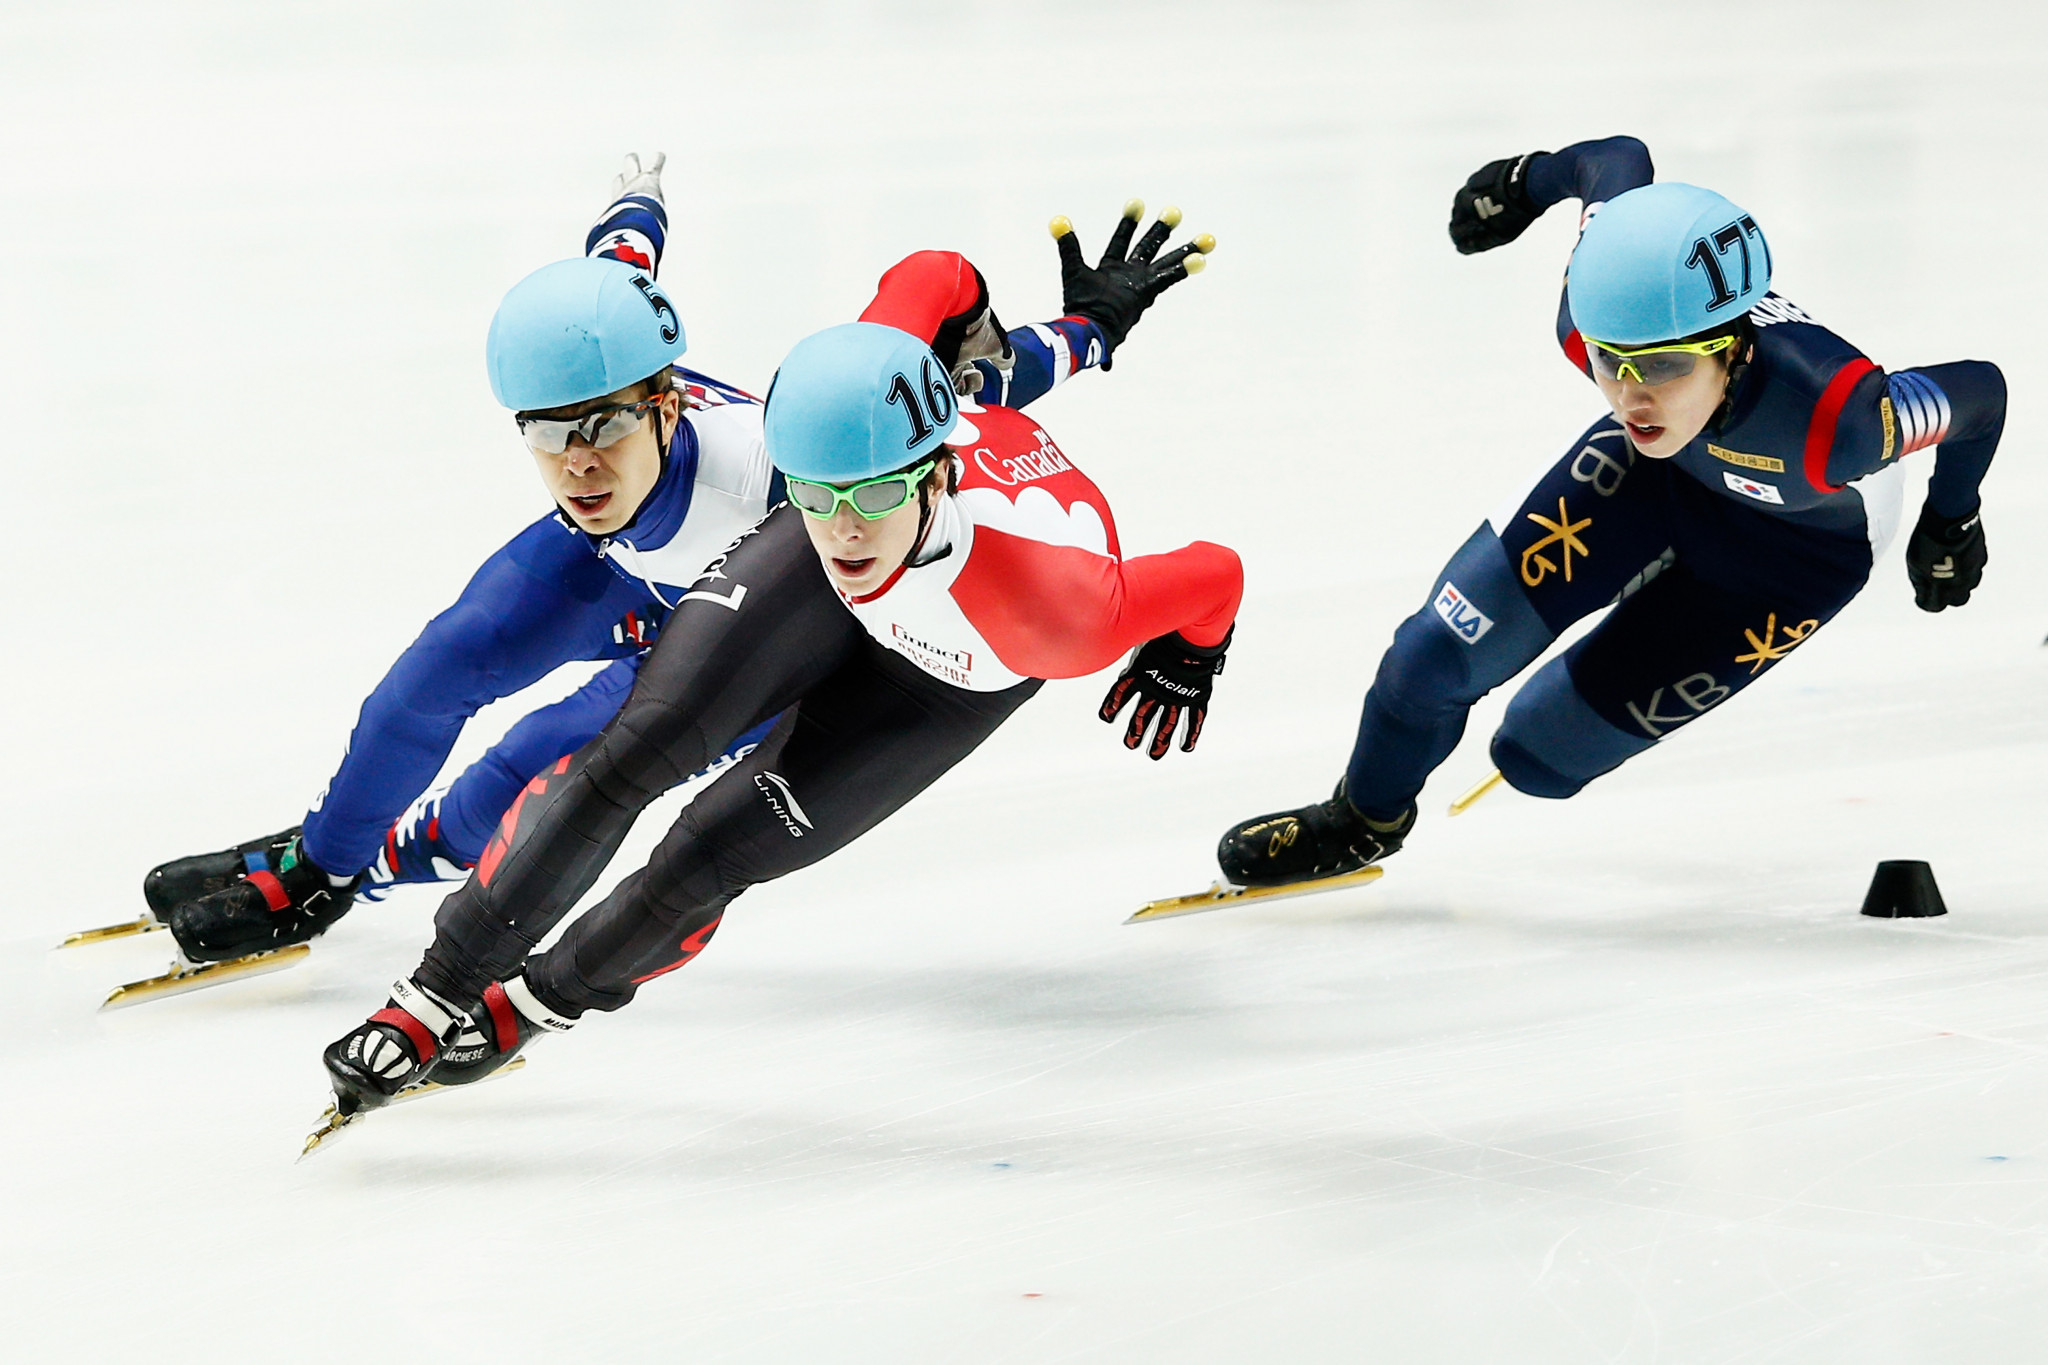 Park and Schulting secure overall 1,500m titles at ISU Short Track World Cup